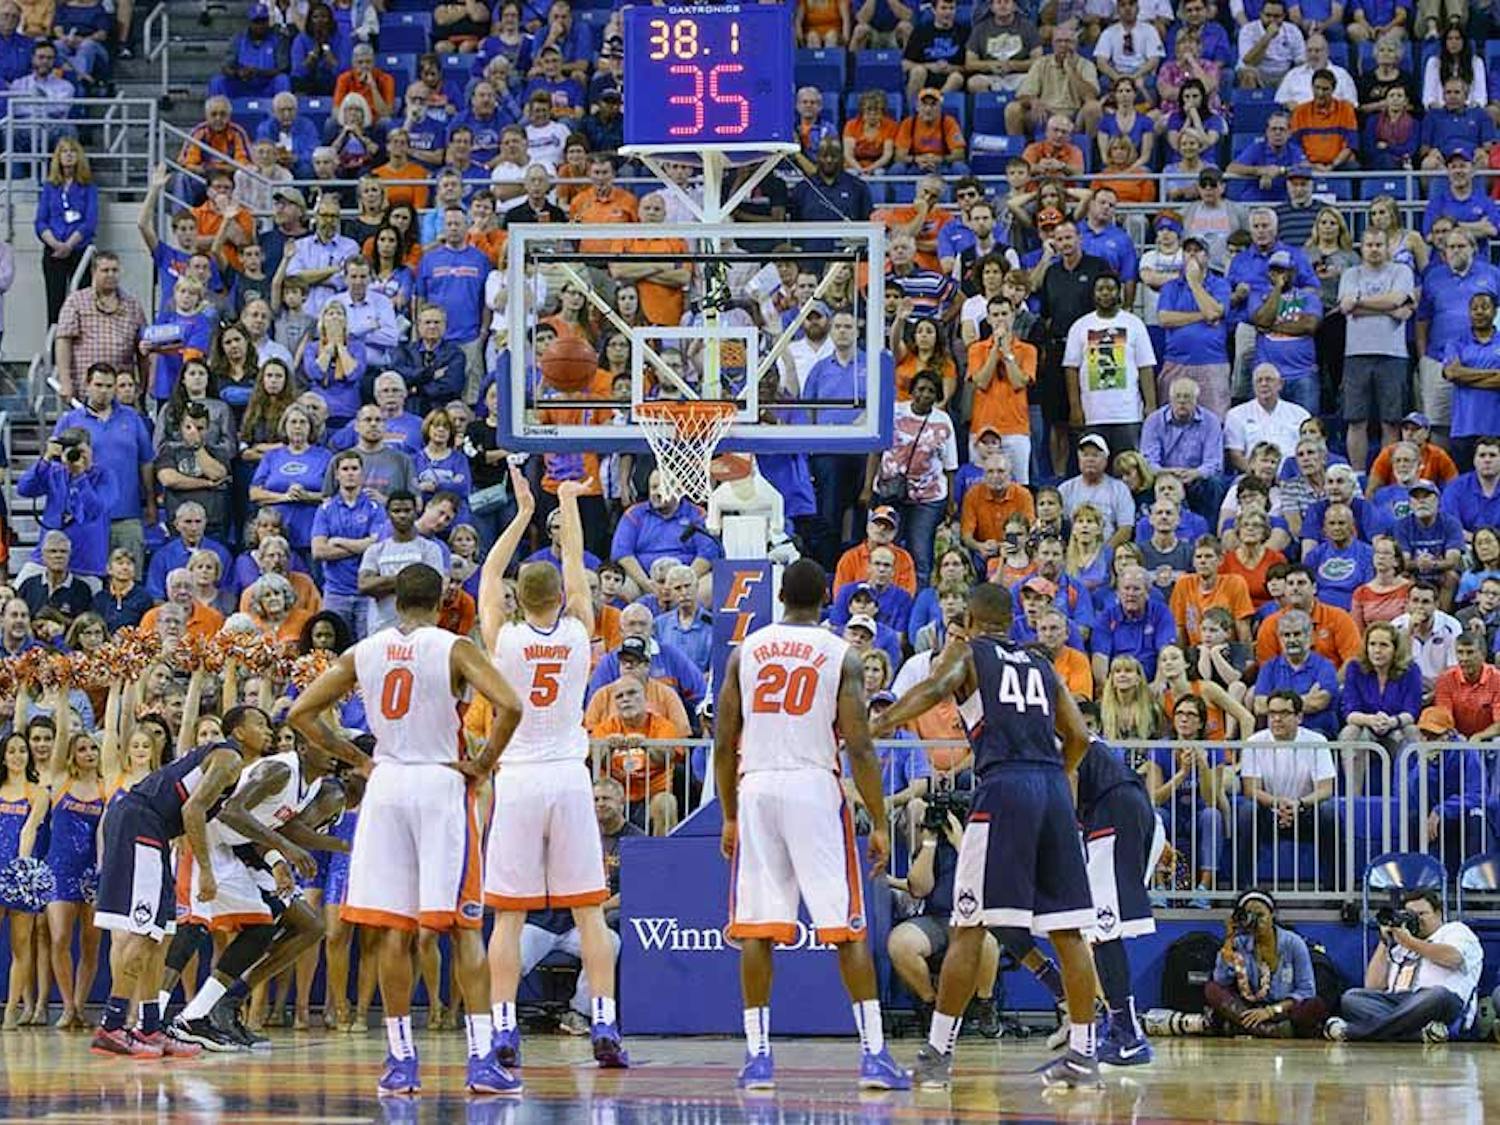 Alex Murphy attempts a free throw during Florida's loss to Connecticut on Saturday